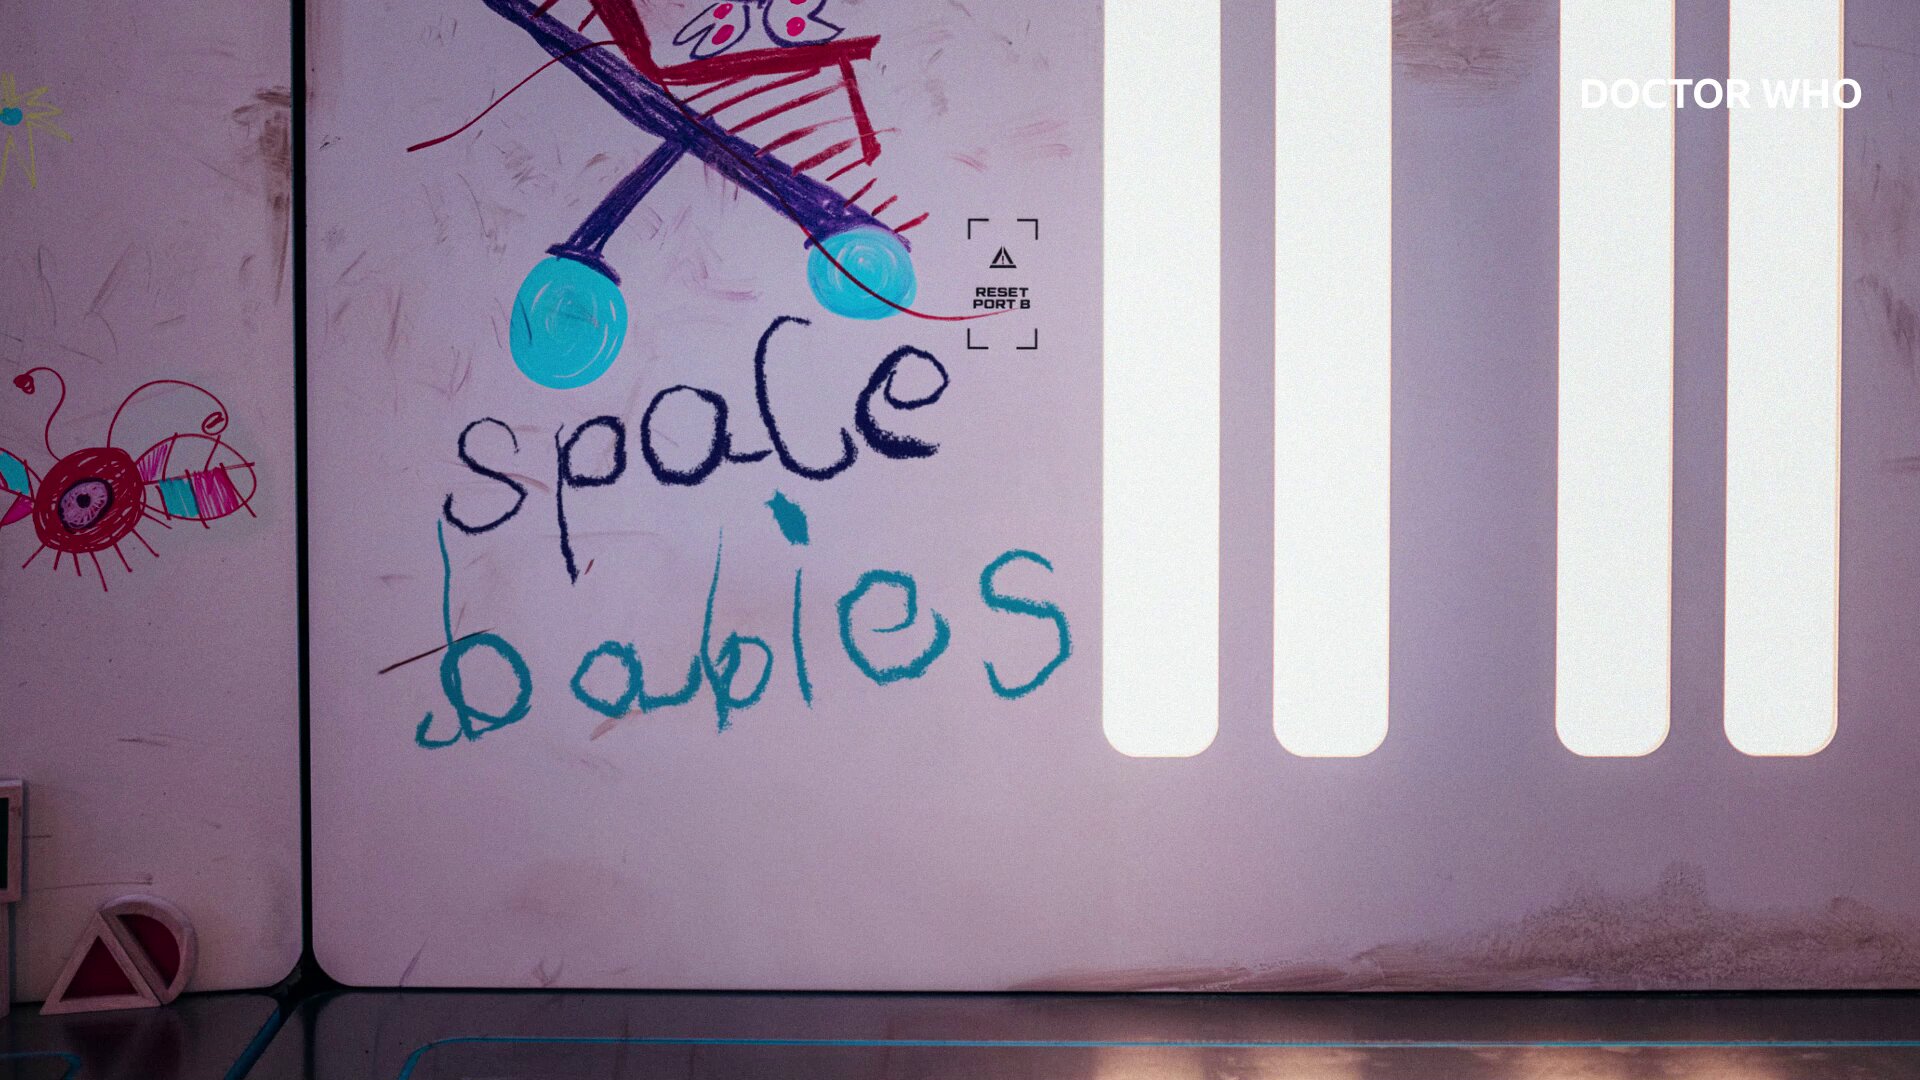 Review: Doctor Who: Space Babies